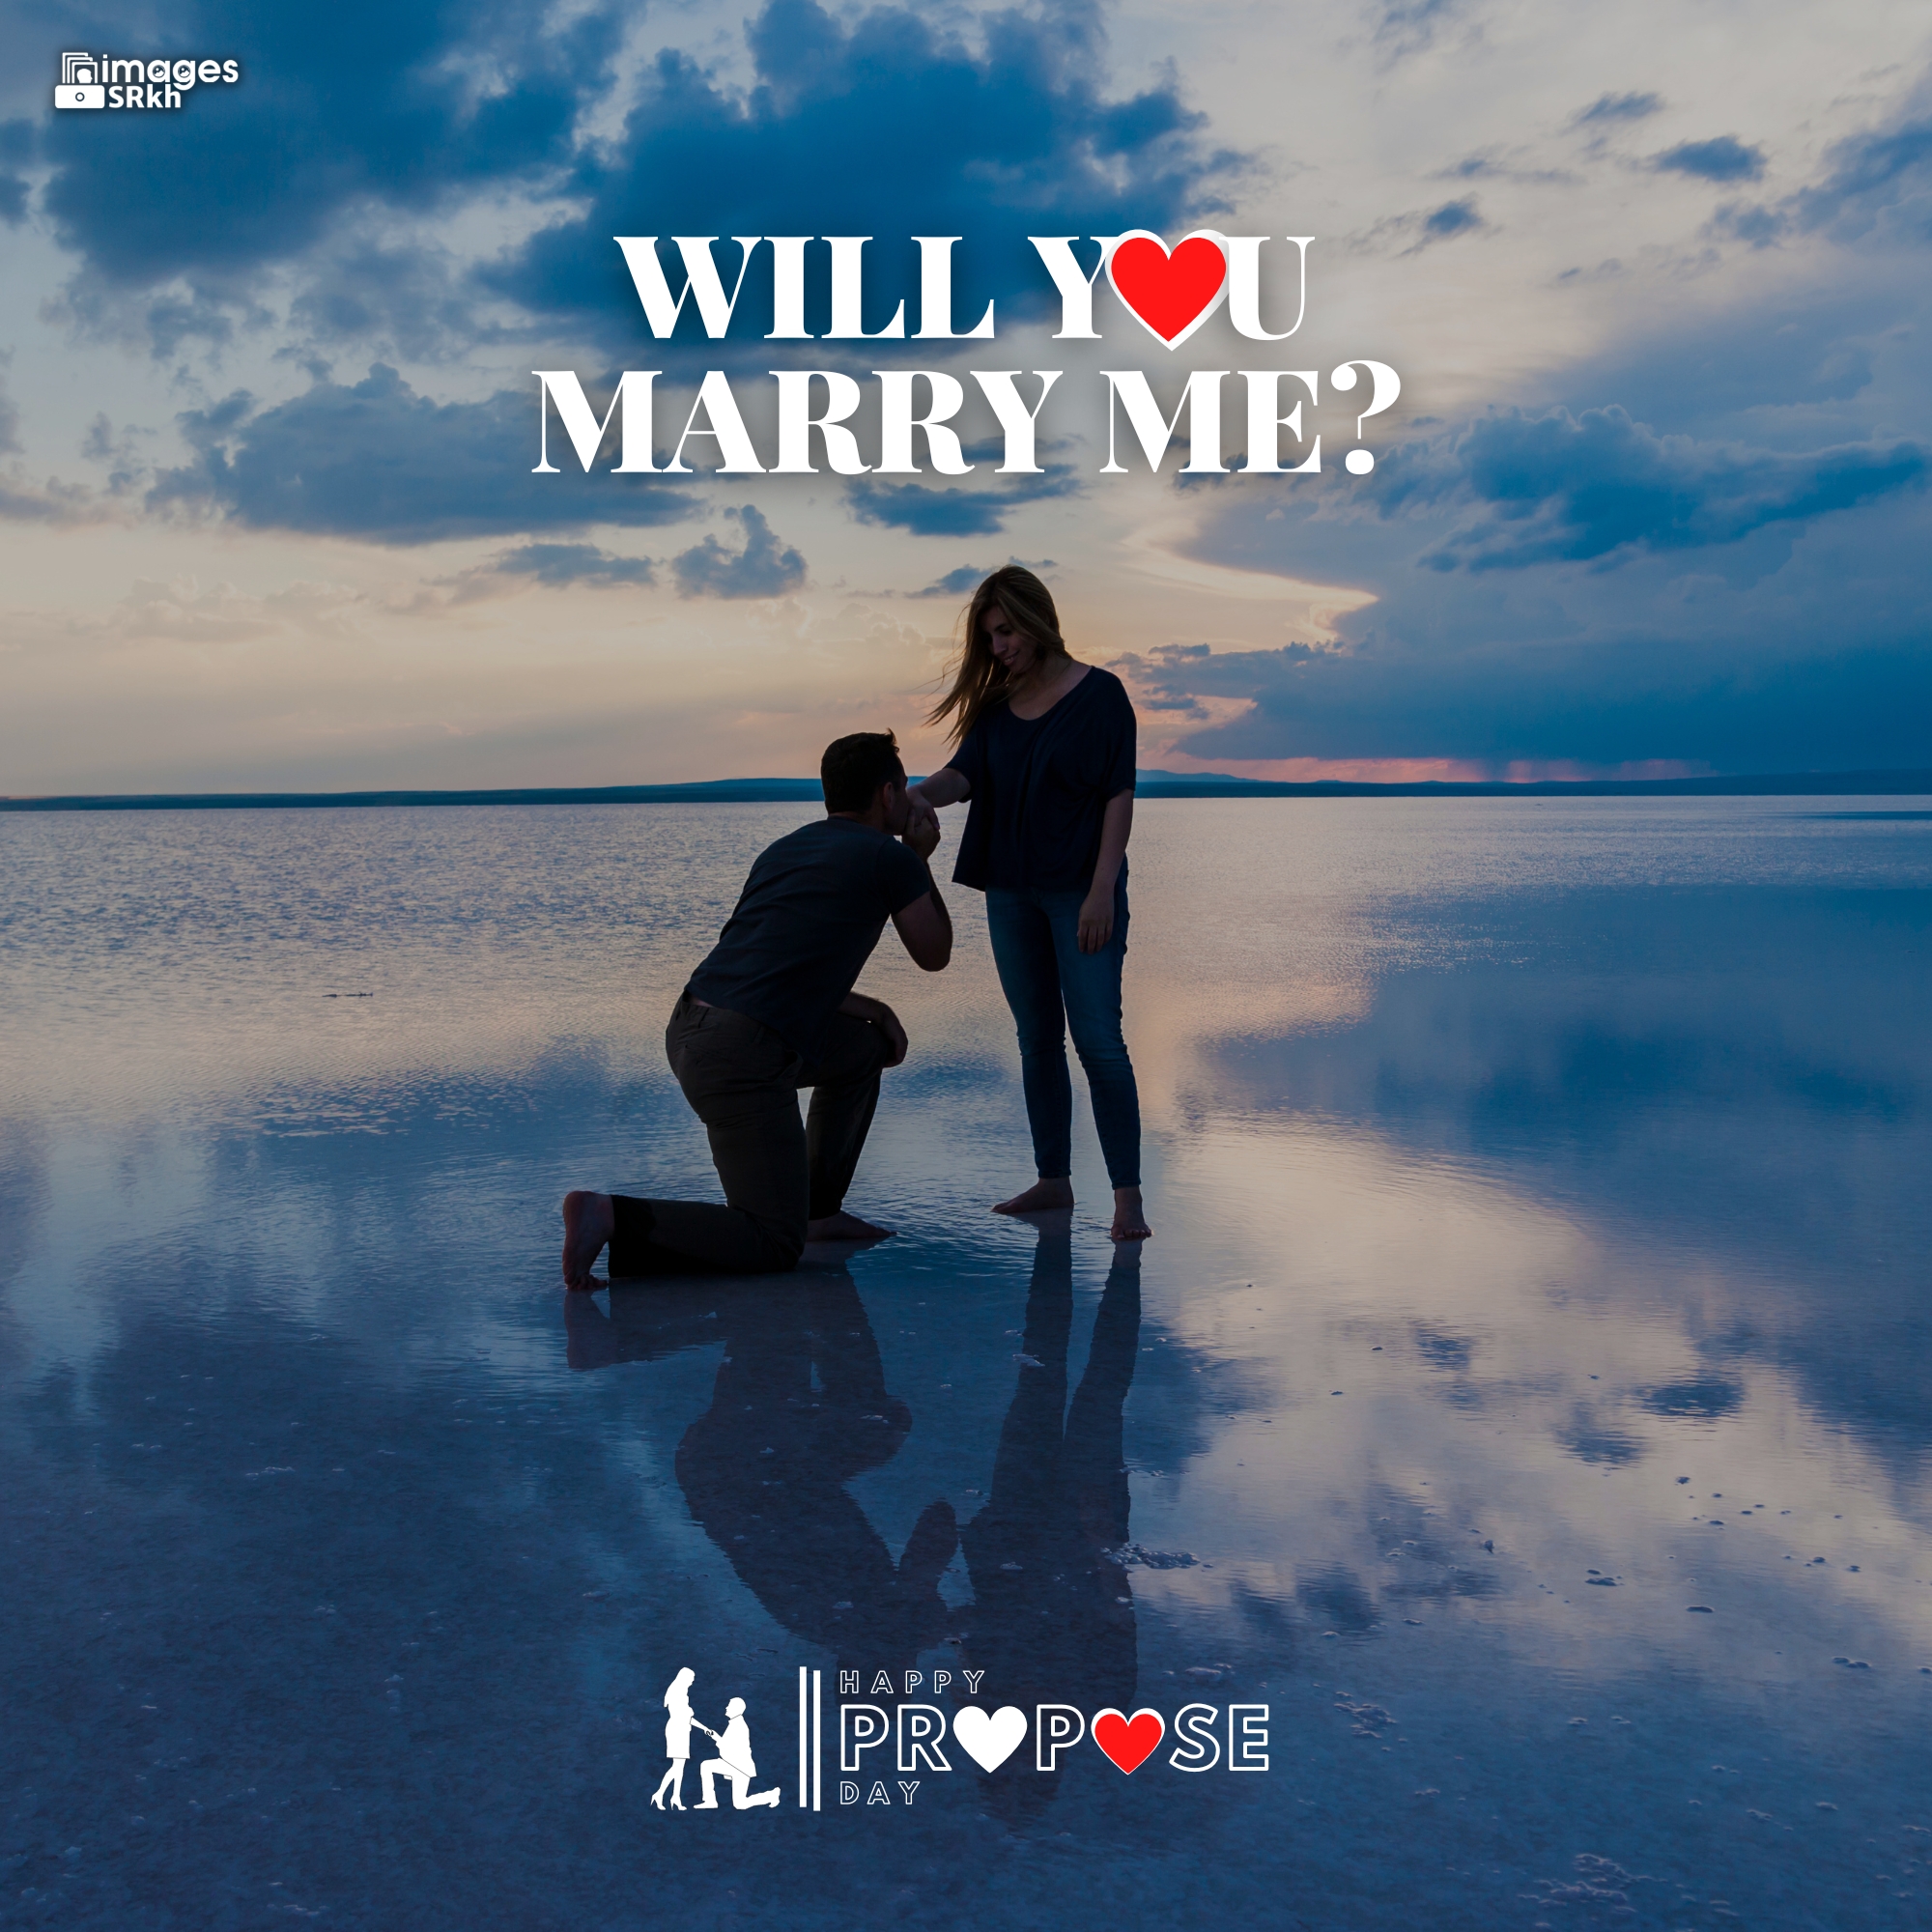 Propose Day Images | 296 | Will You MARRY ME